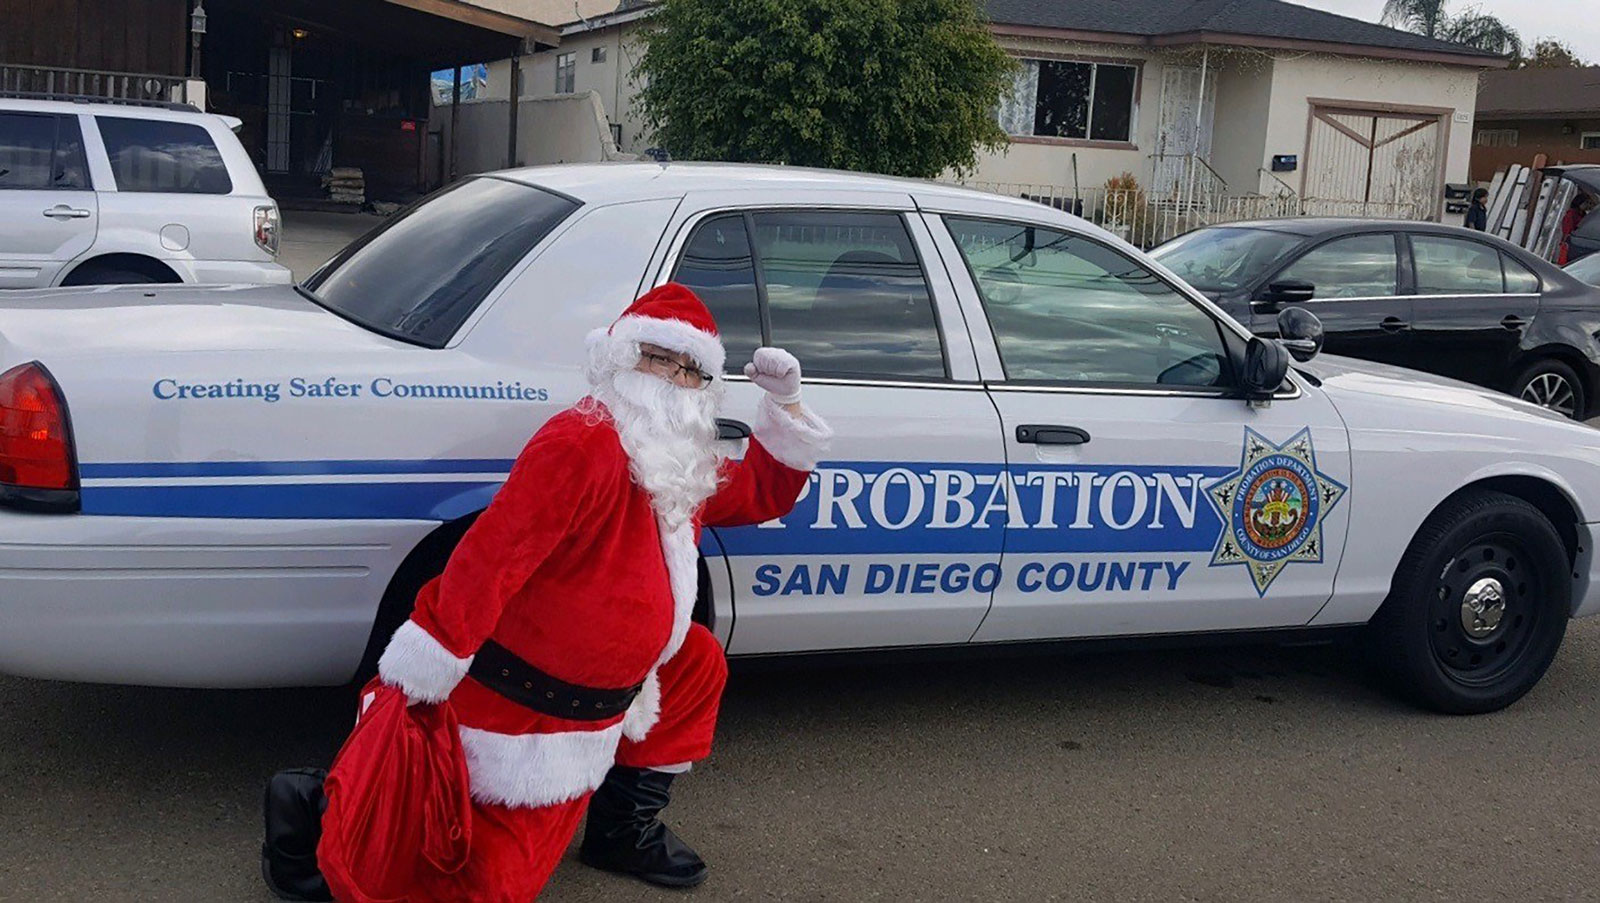 Santa Claus with his toy bag outside a San Diego County Probation car.